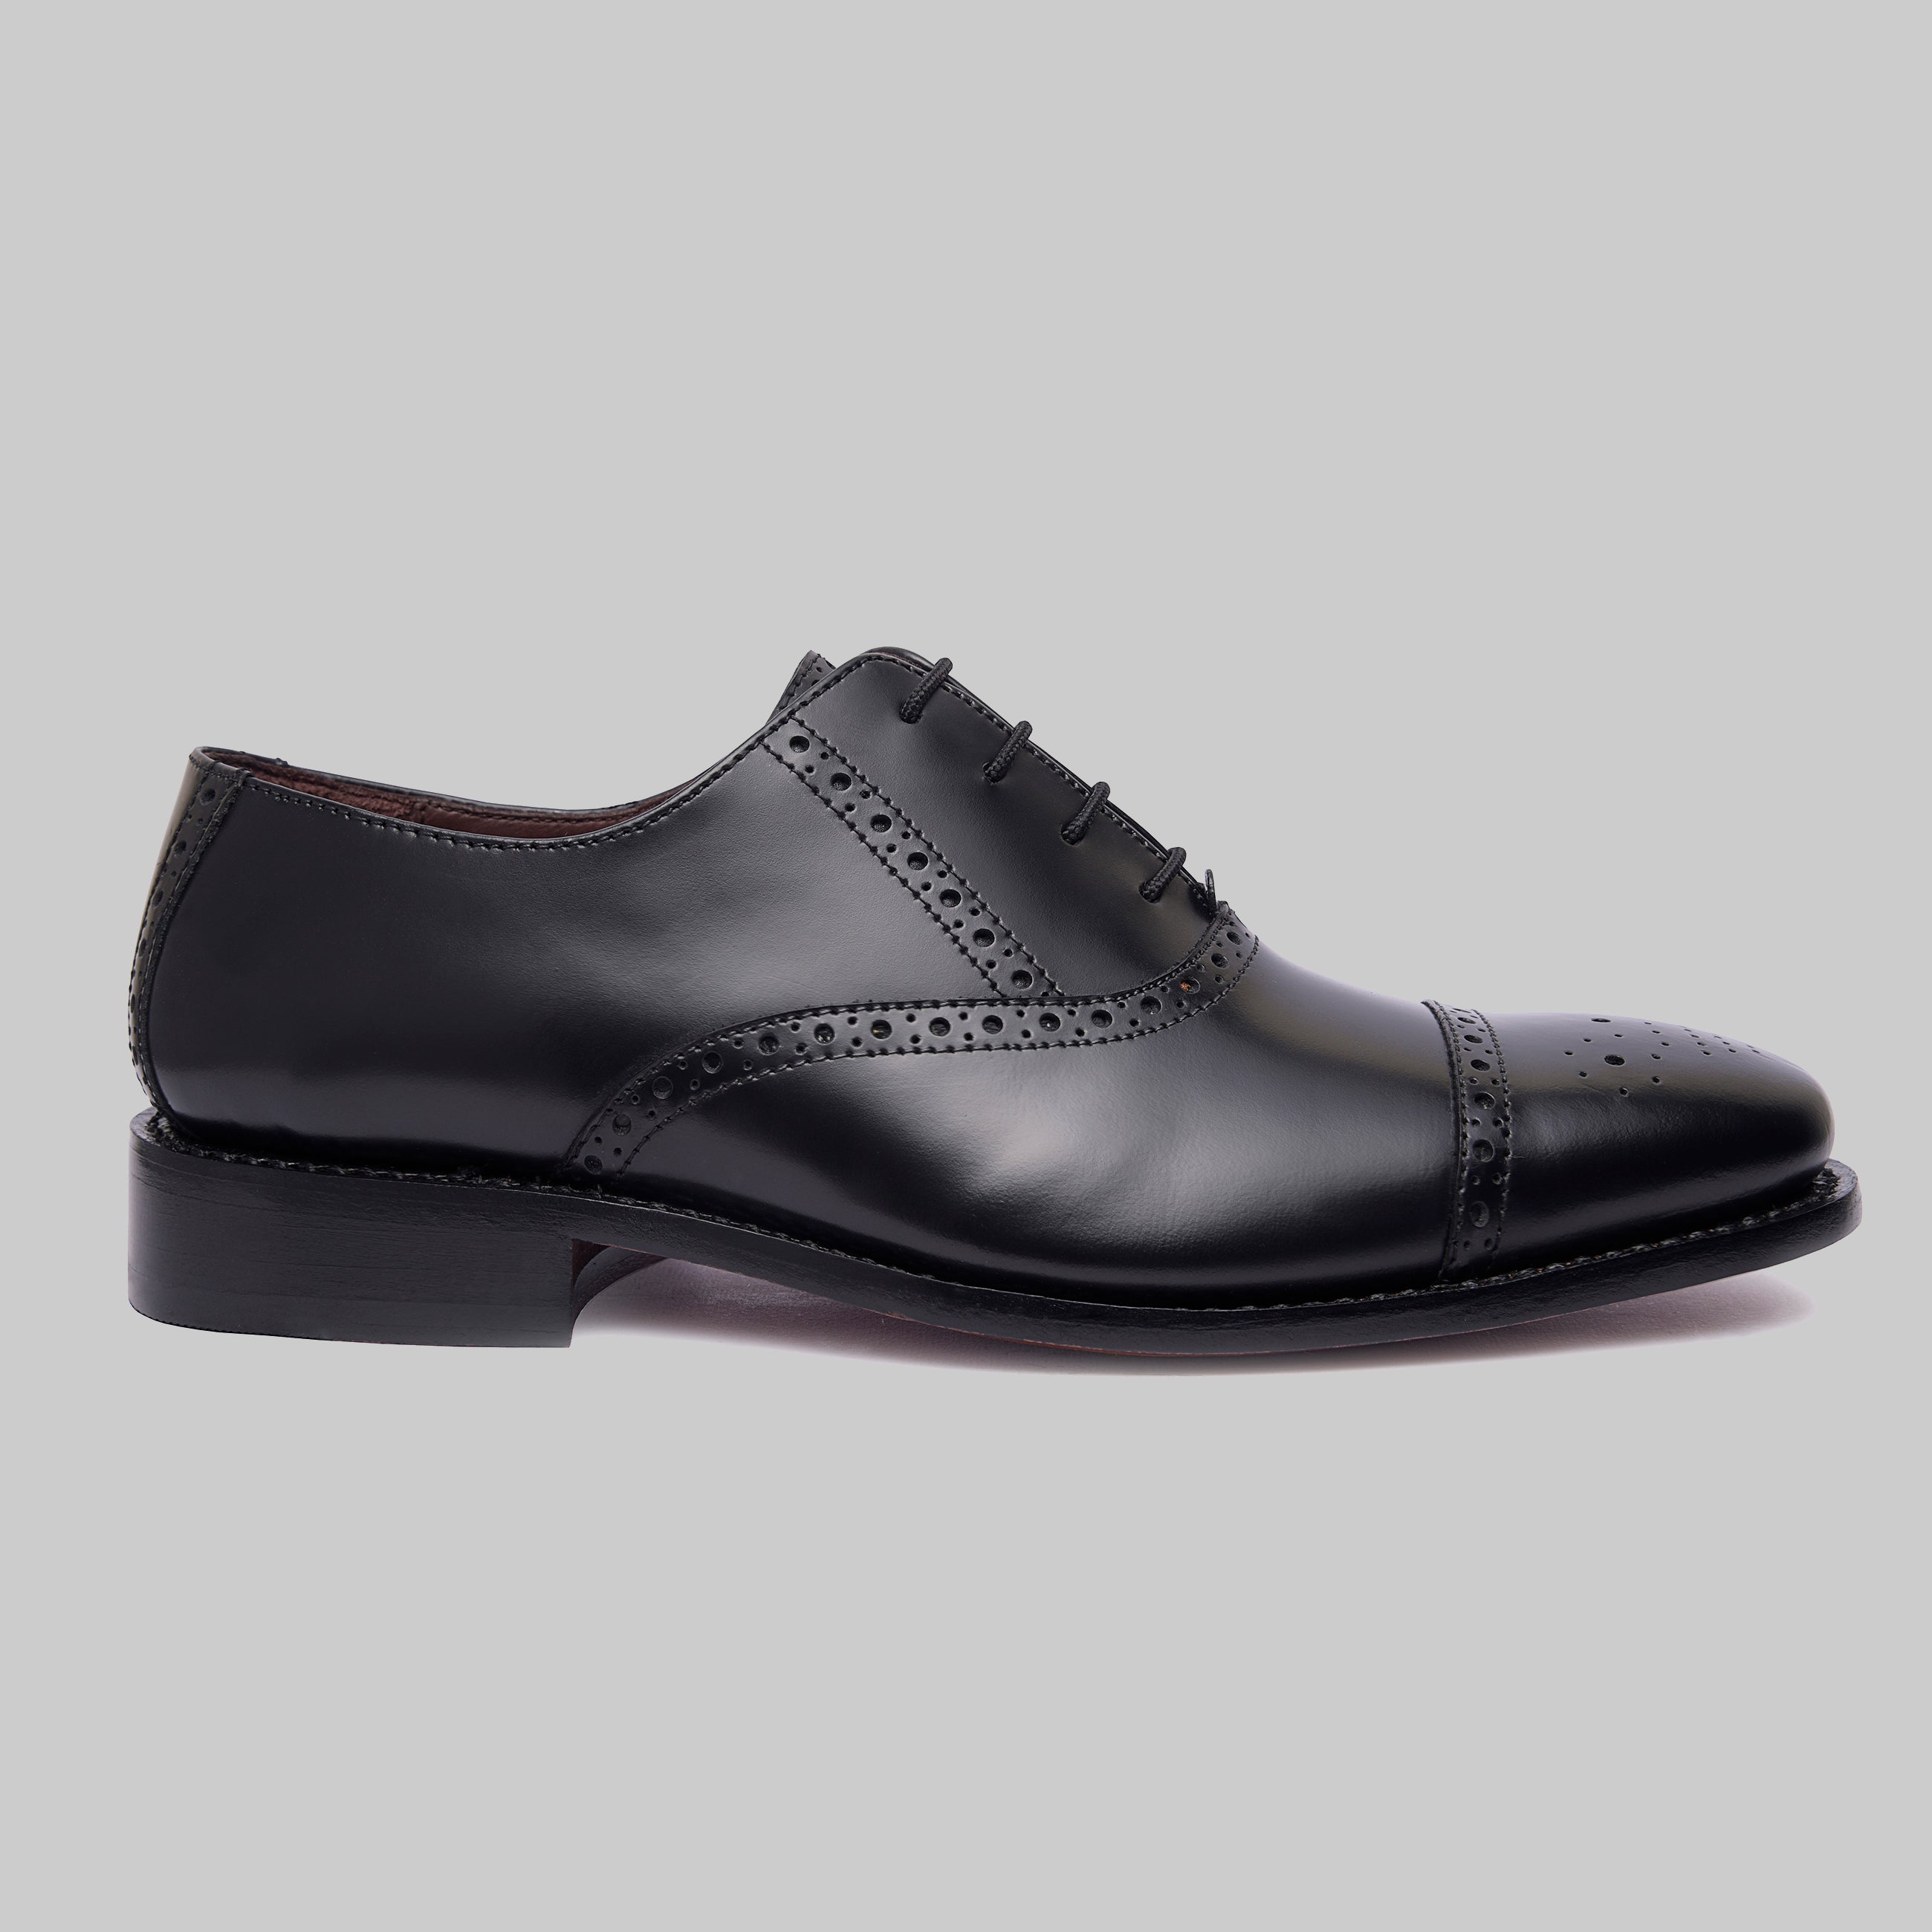 Tallon Goodyear Welted Cap Toe Wingtip Oxford Dress Shoes